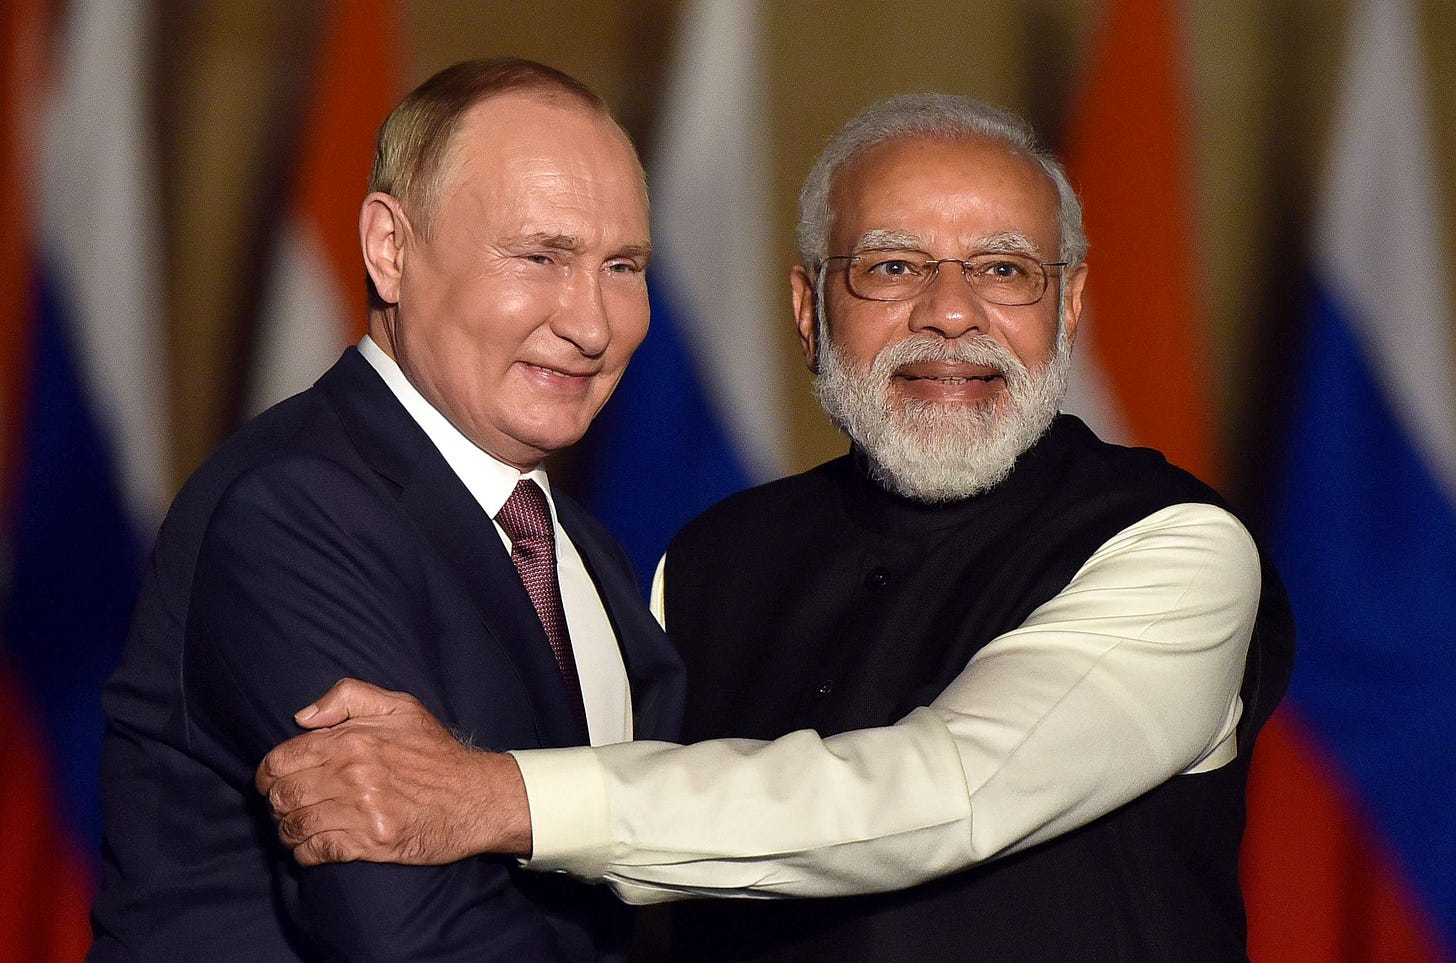 What's behind India's strategic neutrality on Russia's invasion of Ukraine  - ABC News